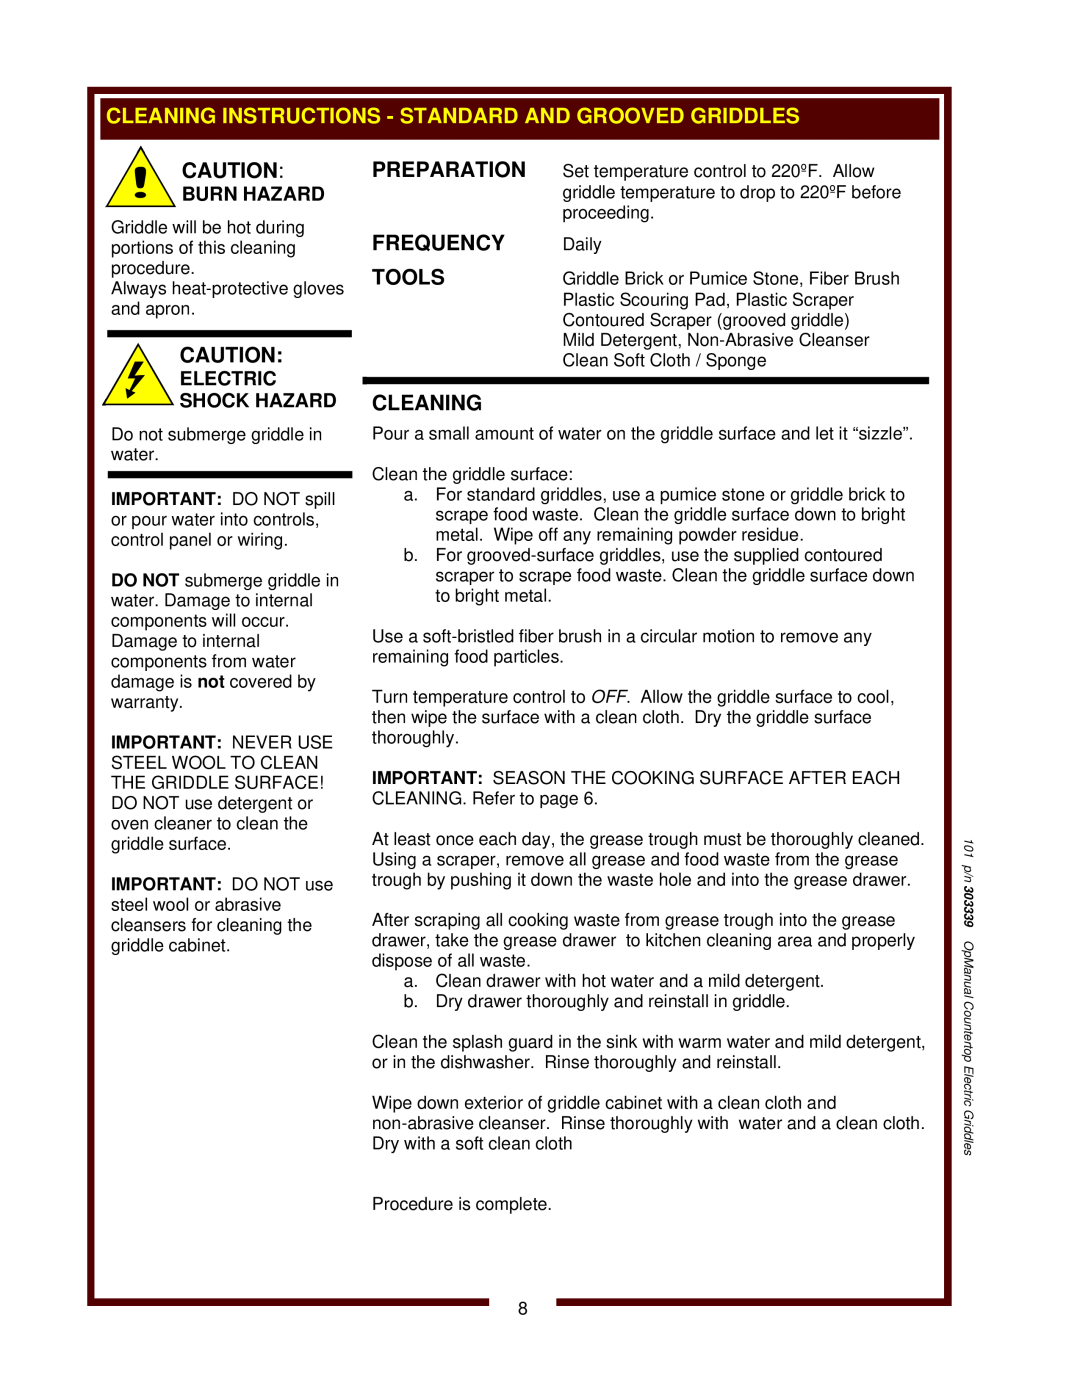 Bloomfield G60, G-23 Cleaning Instructions - Standard And Grooved Griddles, Preparation, Frequency, Tools, Burn Hazard 